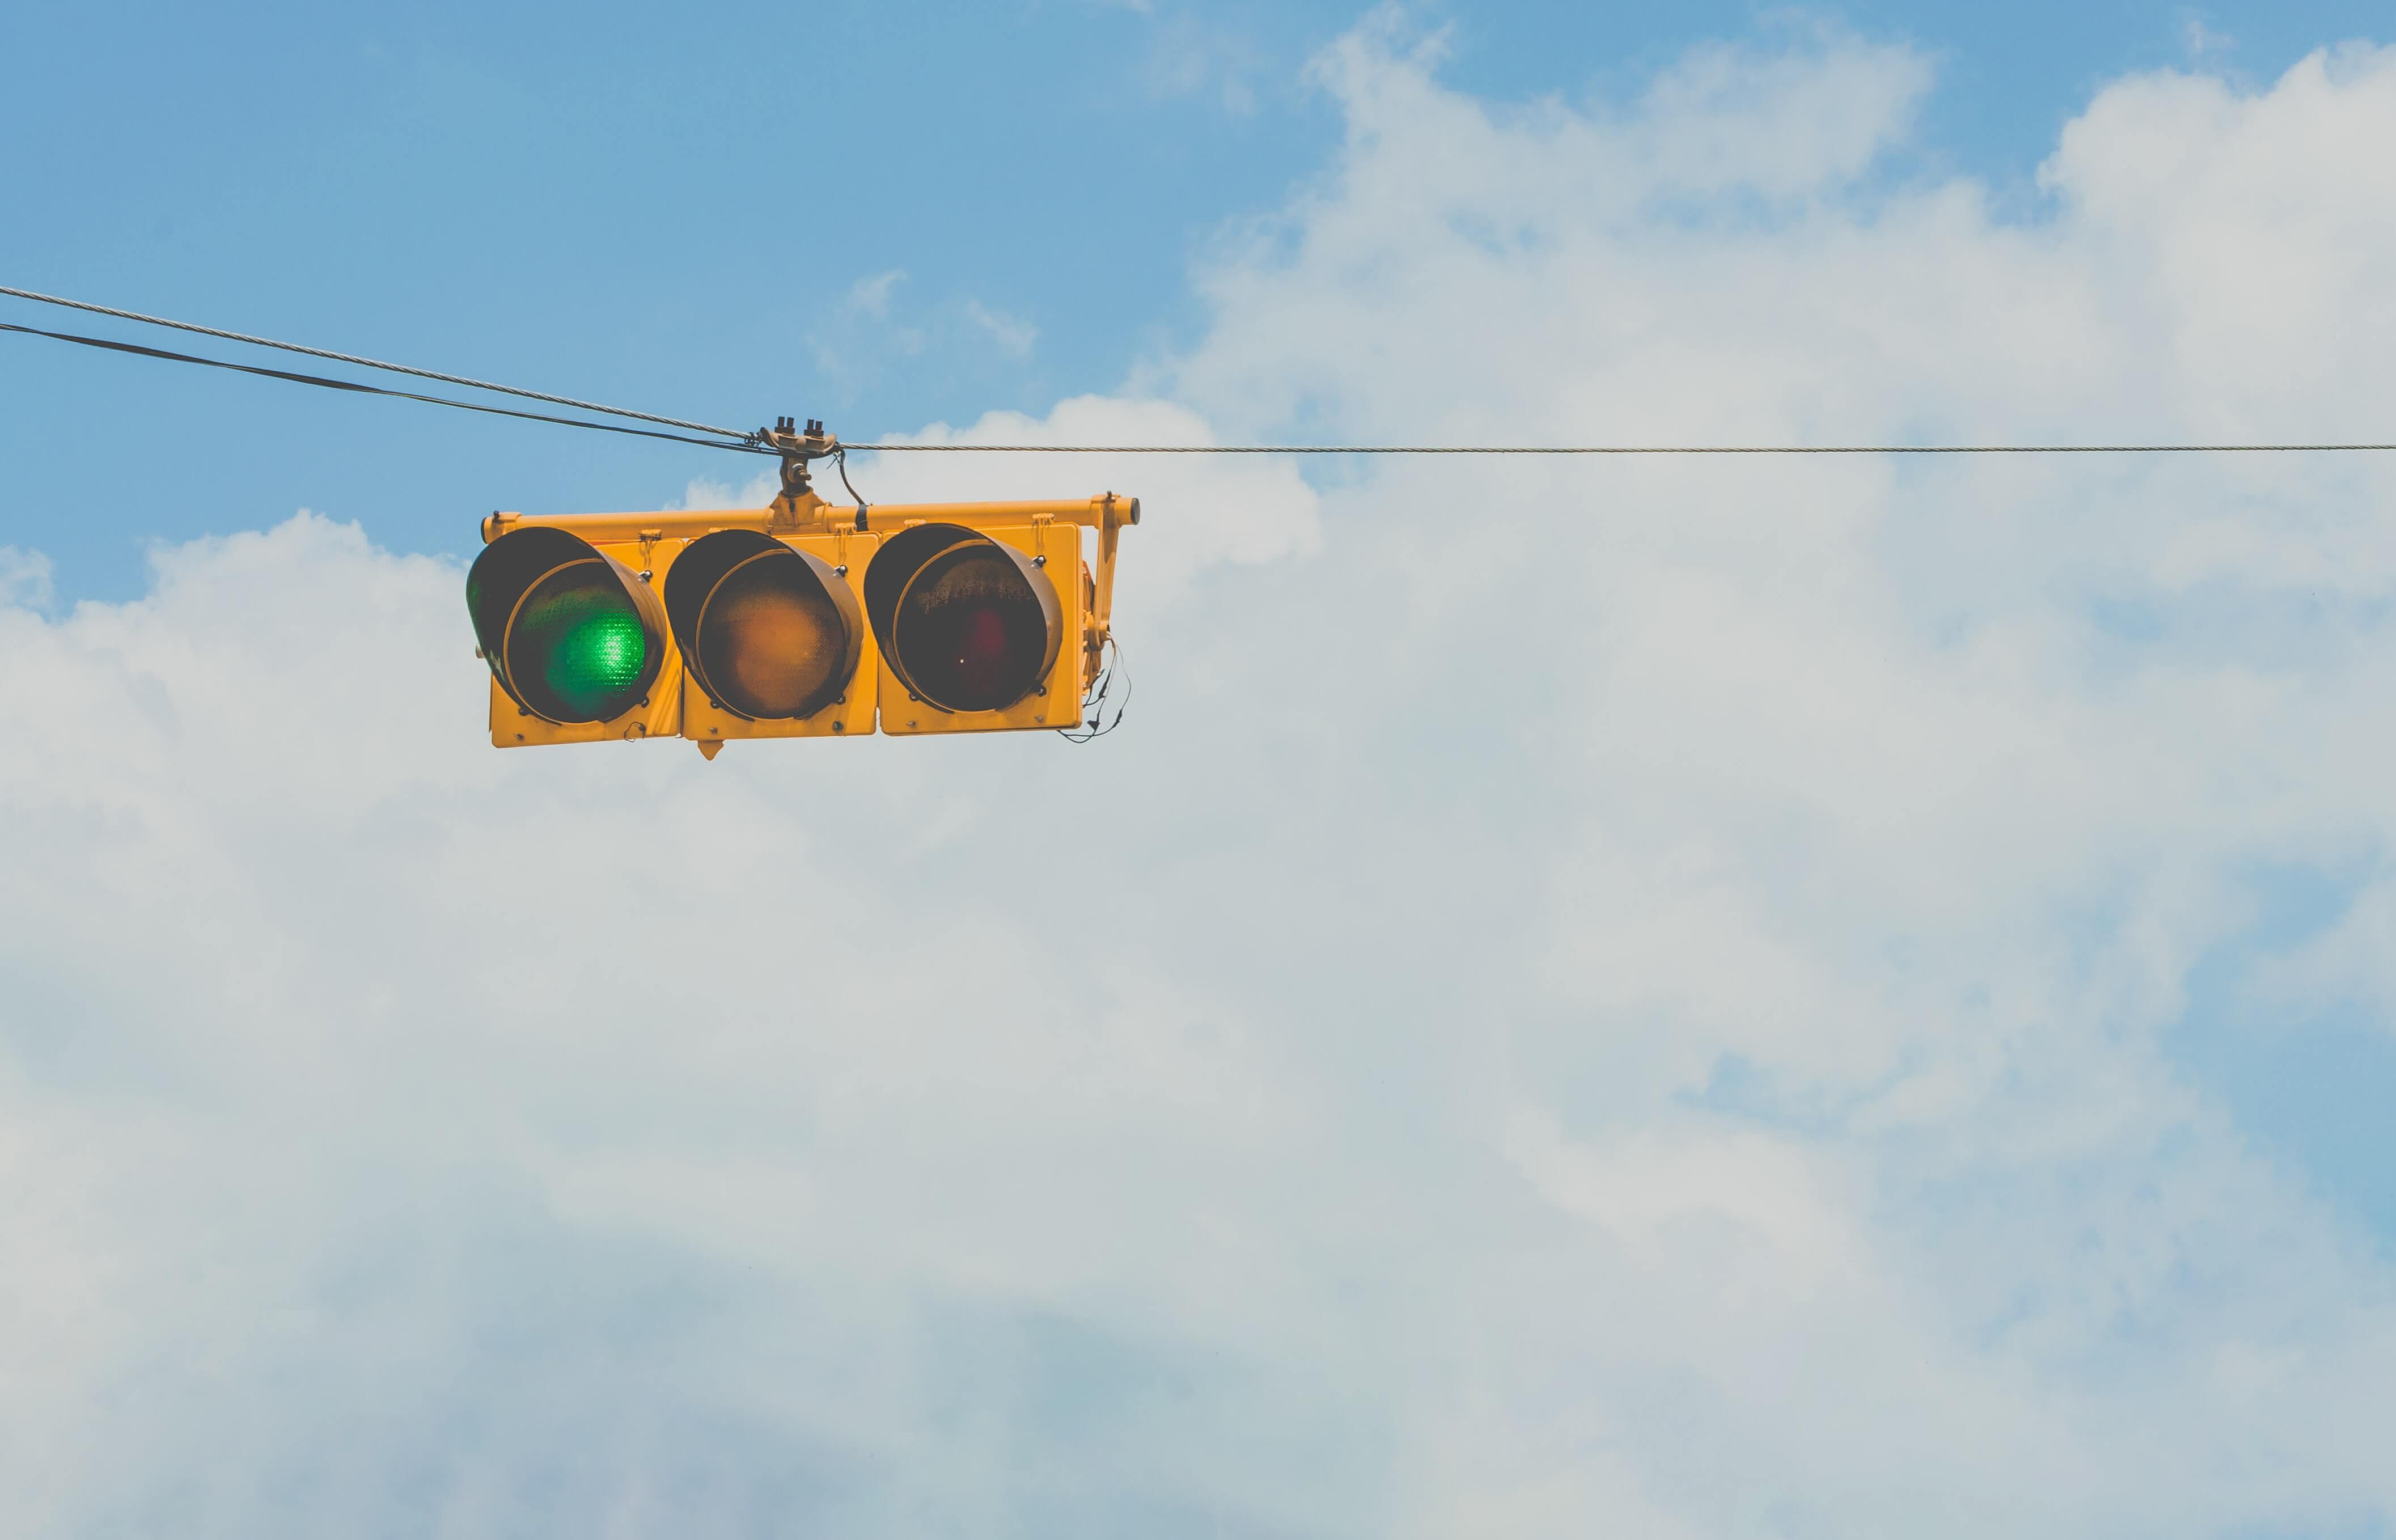 traffic lights suspended horizontally with electrical wires